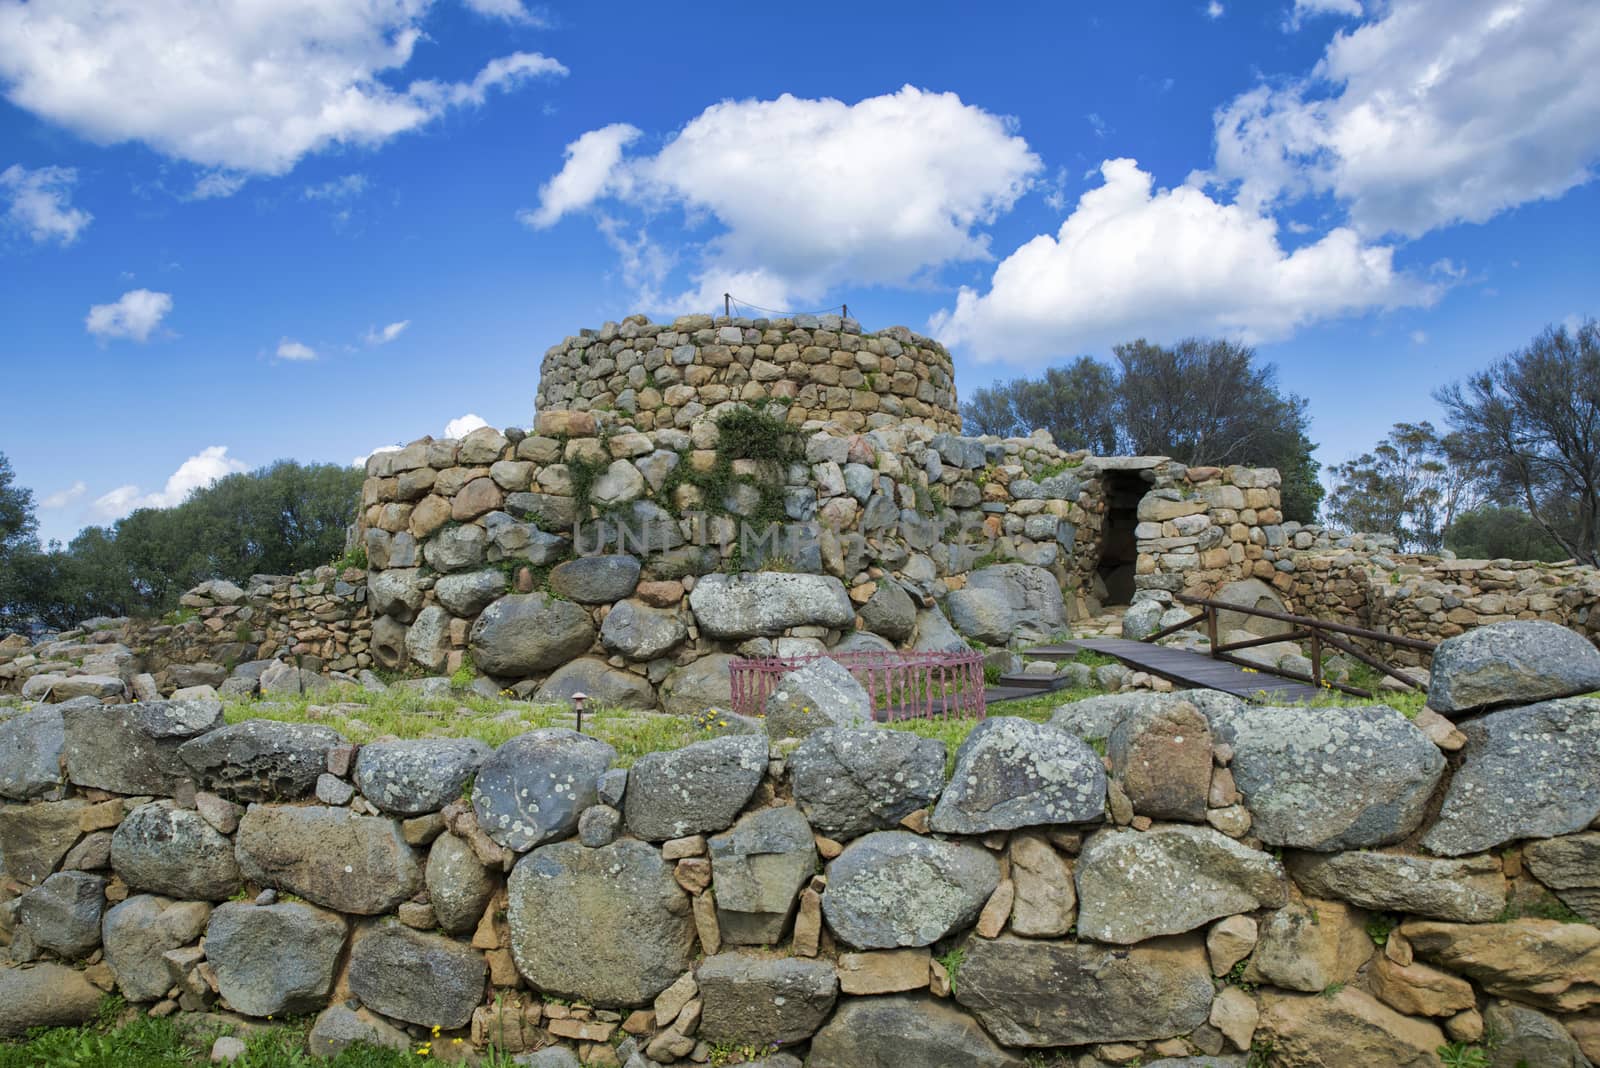 Nuraghe on the island of sardinia Italy,what is known about the Nuragic civilization, is that it was a people of shepherds and farmers grouped into communities who lived in Sardinia for 8 centuries.